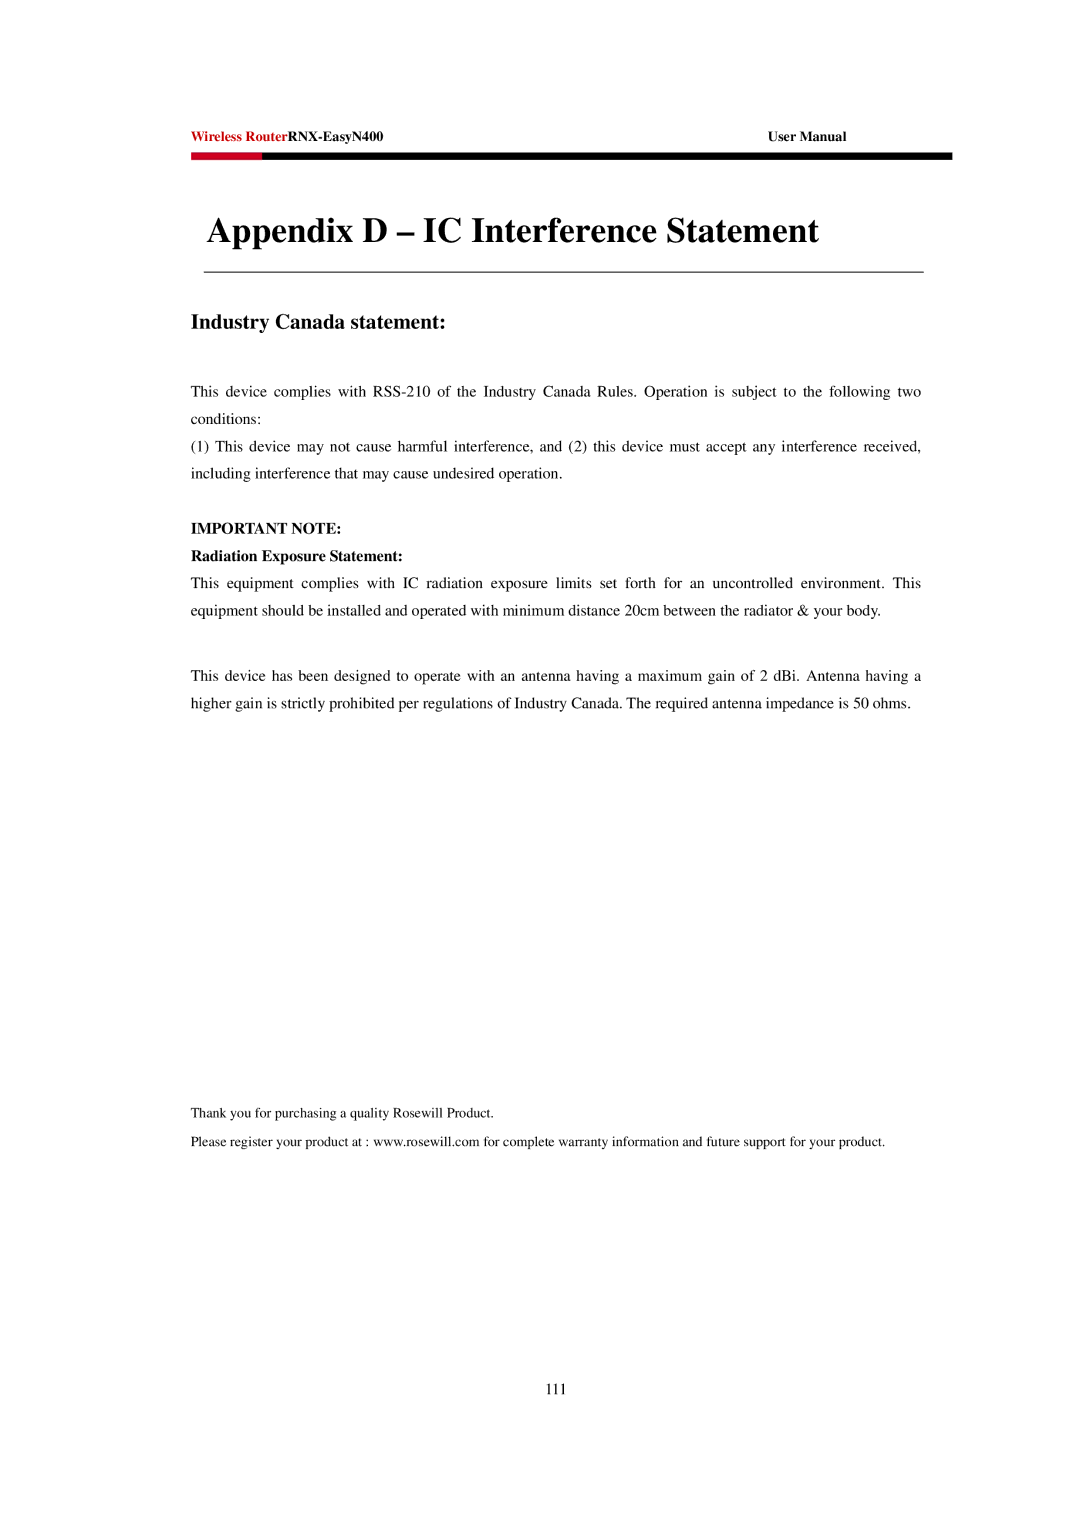 Rosewill EASYN400 user manual Appendix D IC Interference Statement, Industry Canada statement 